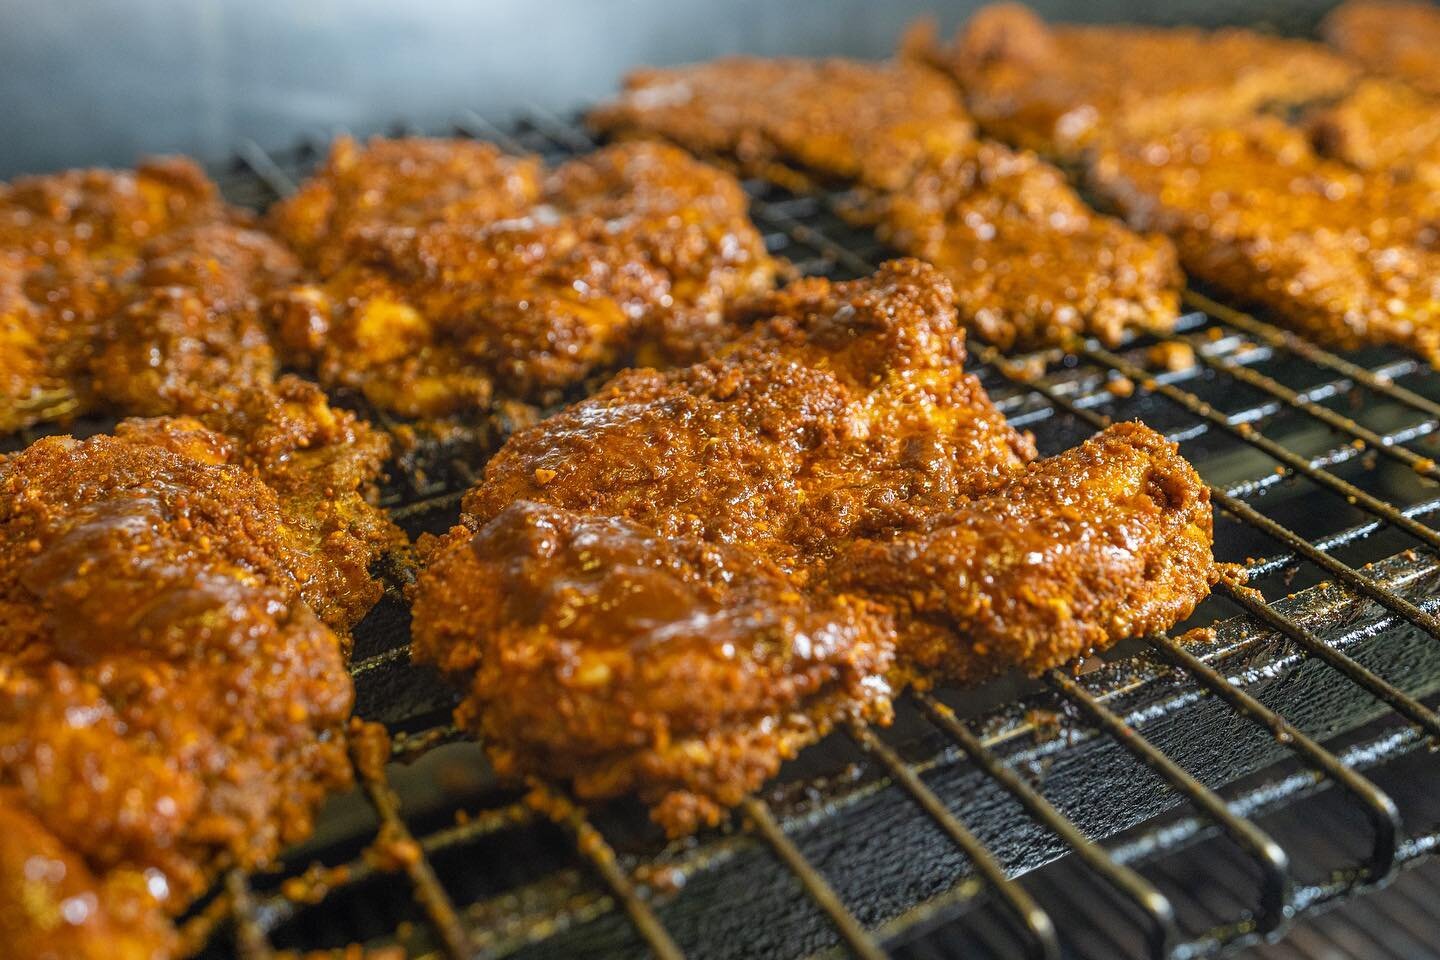 Spice up your Wednesday with some Suya Chicken 🔥🍗

Open for takeaway and delivery until 11pm today!
⁠.⁠
.⁠
.⁠
#moimoiisland #maginhawagroup⁠
.⁠
.⁠
.⁠
.⁠
#suya #africanfood #westafricanfood #africanfoodie #friedplantains #ghanaianfood #africandishes